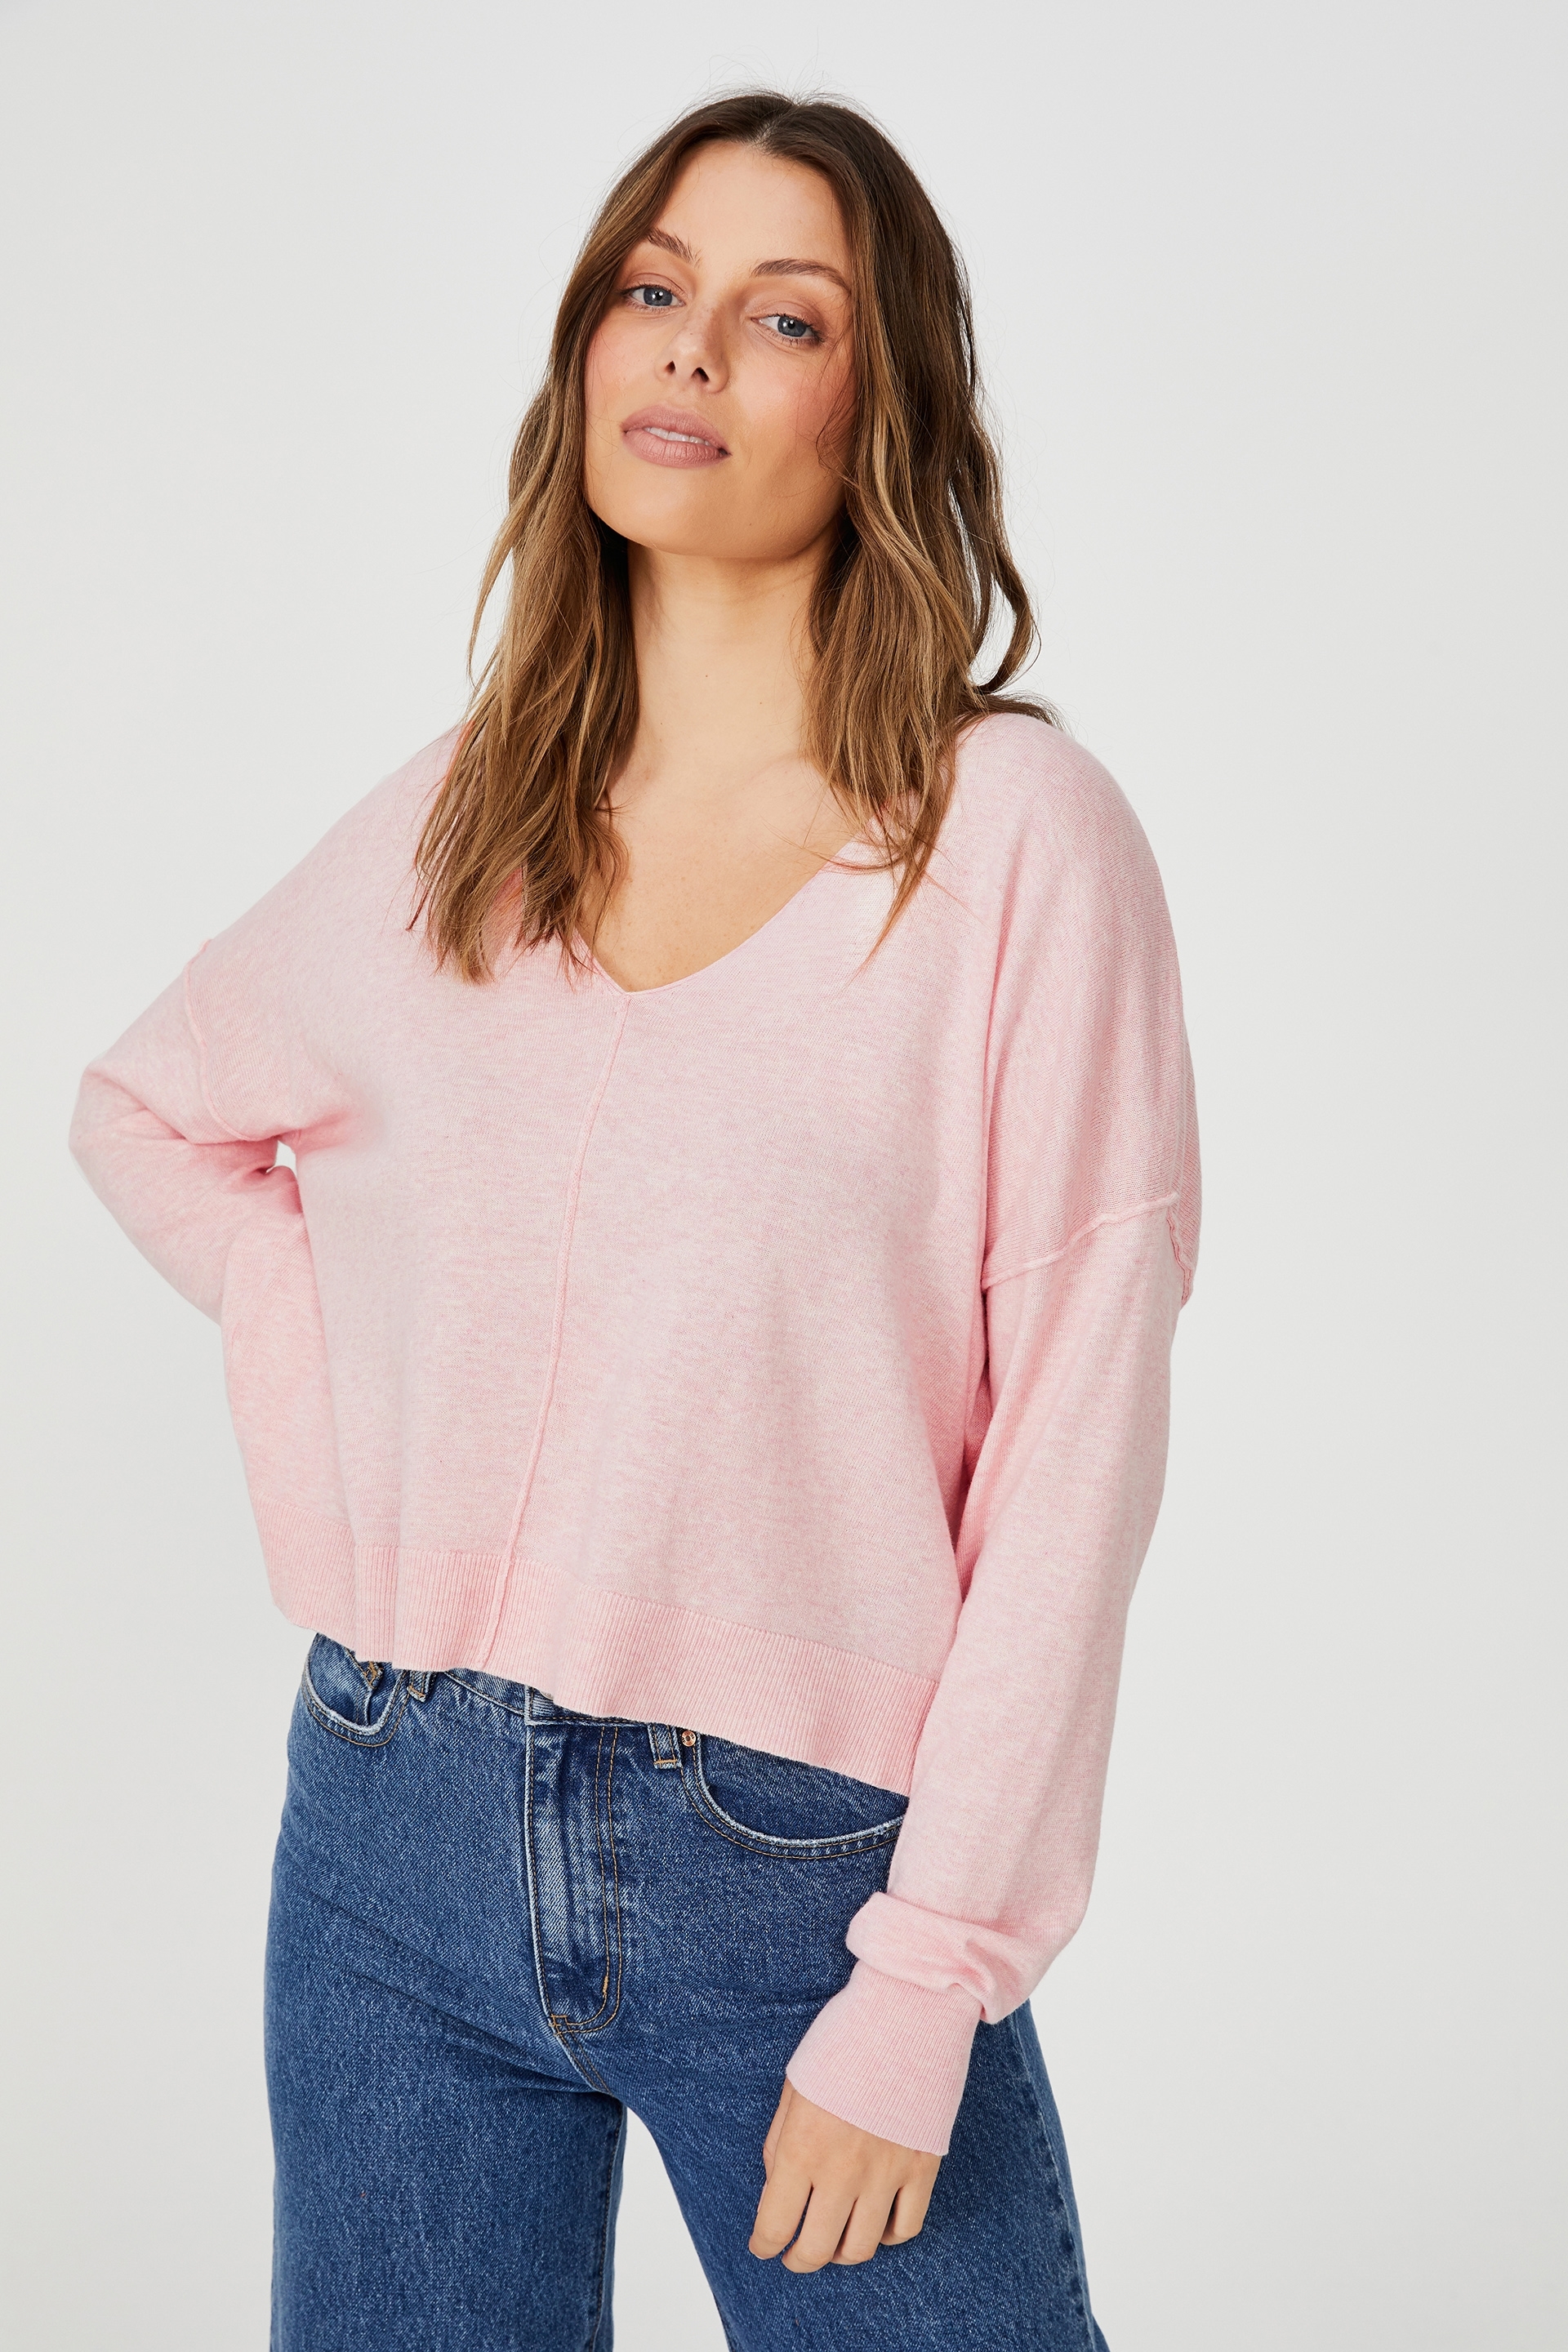 Cotton On Women - Cotton Vegetable Dye V Neck Pullover - Mulberry pink marle